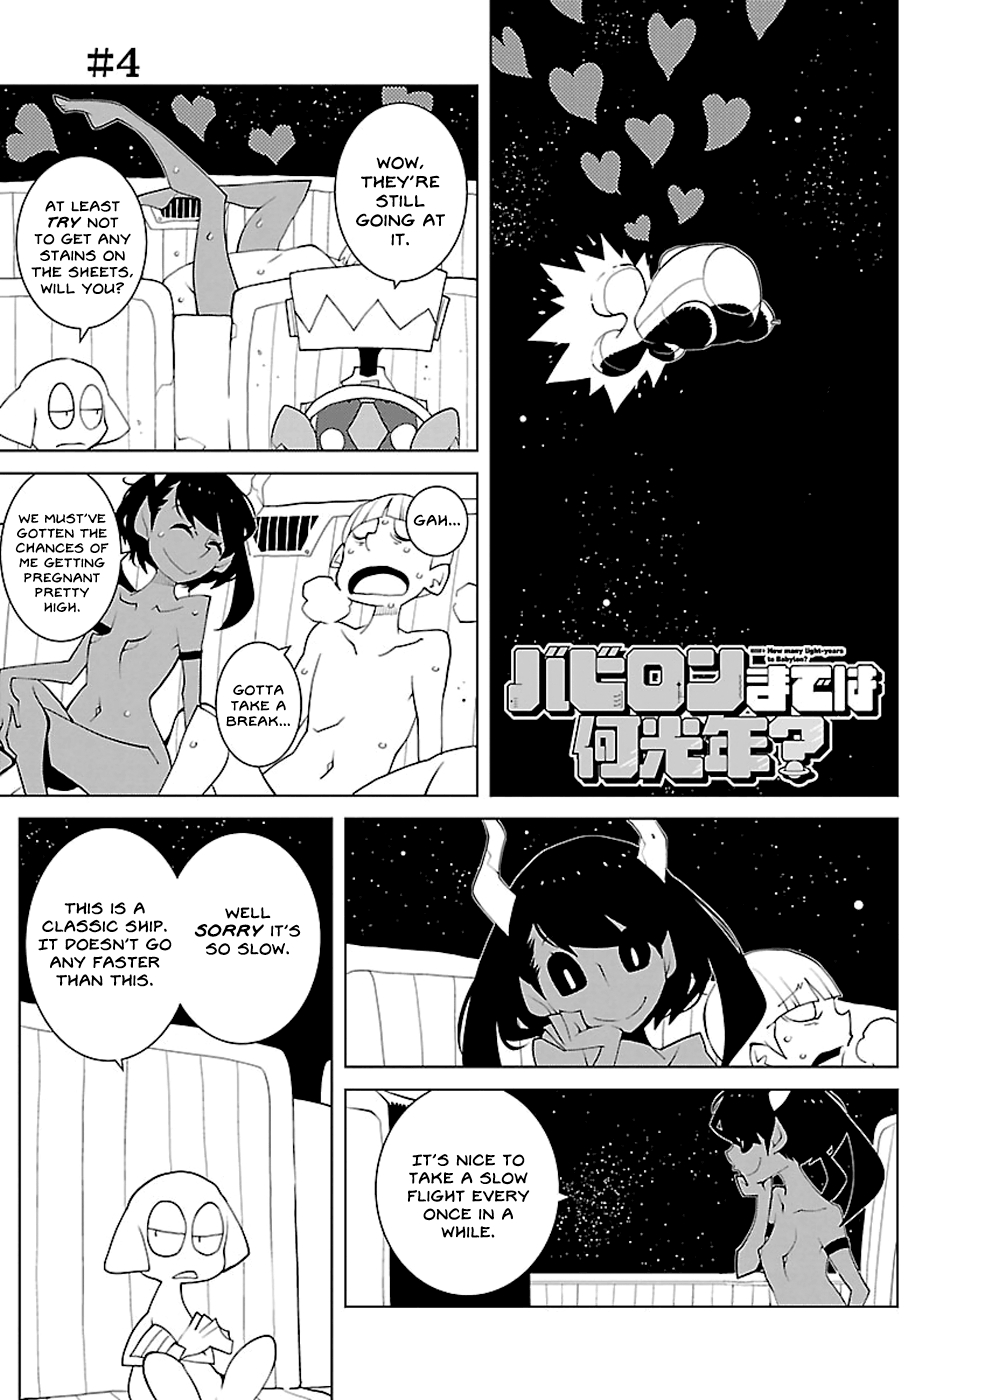 How Many Light-Years to Babylon? Vol.1 Ch.4